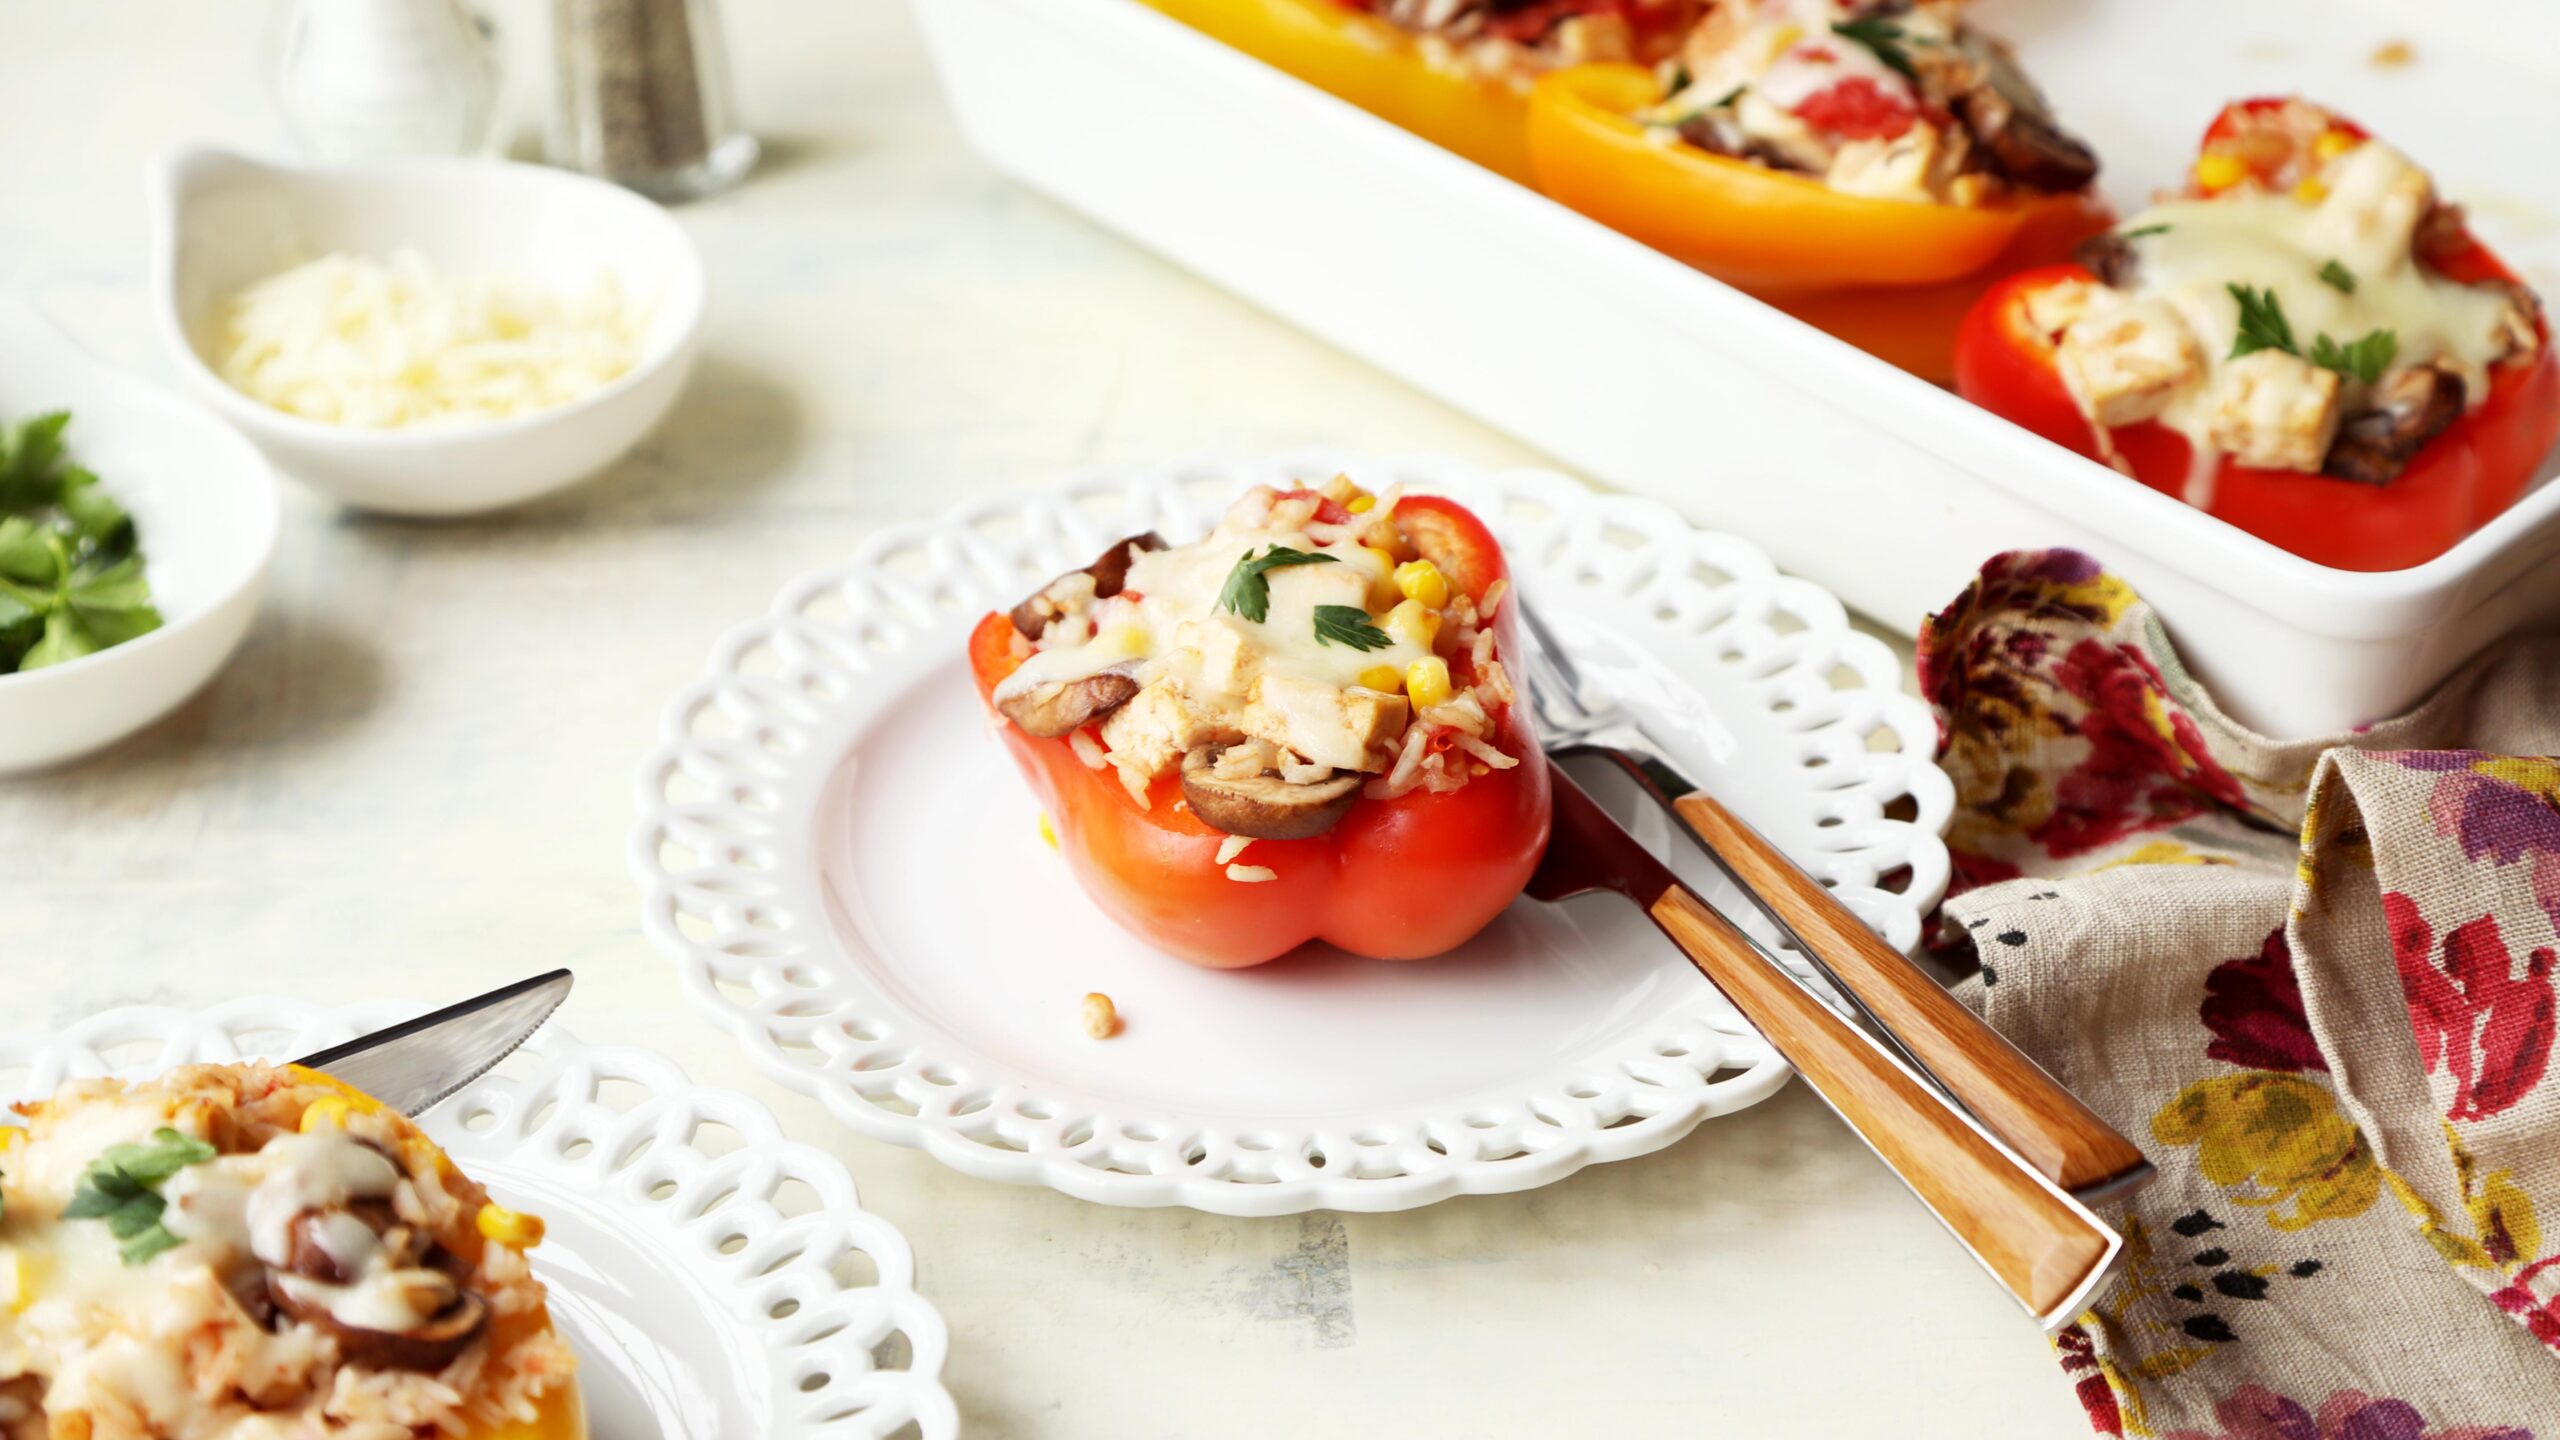  Bell peppers make the perfect edible dish for any filling.